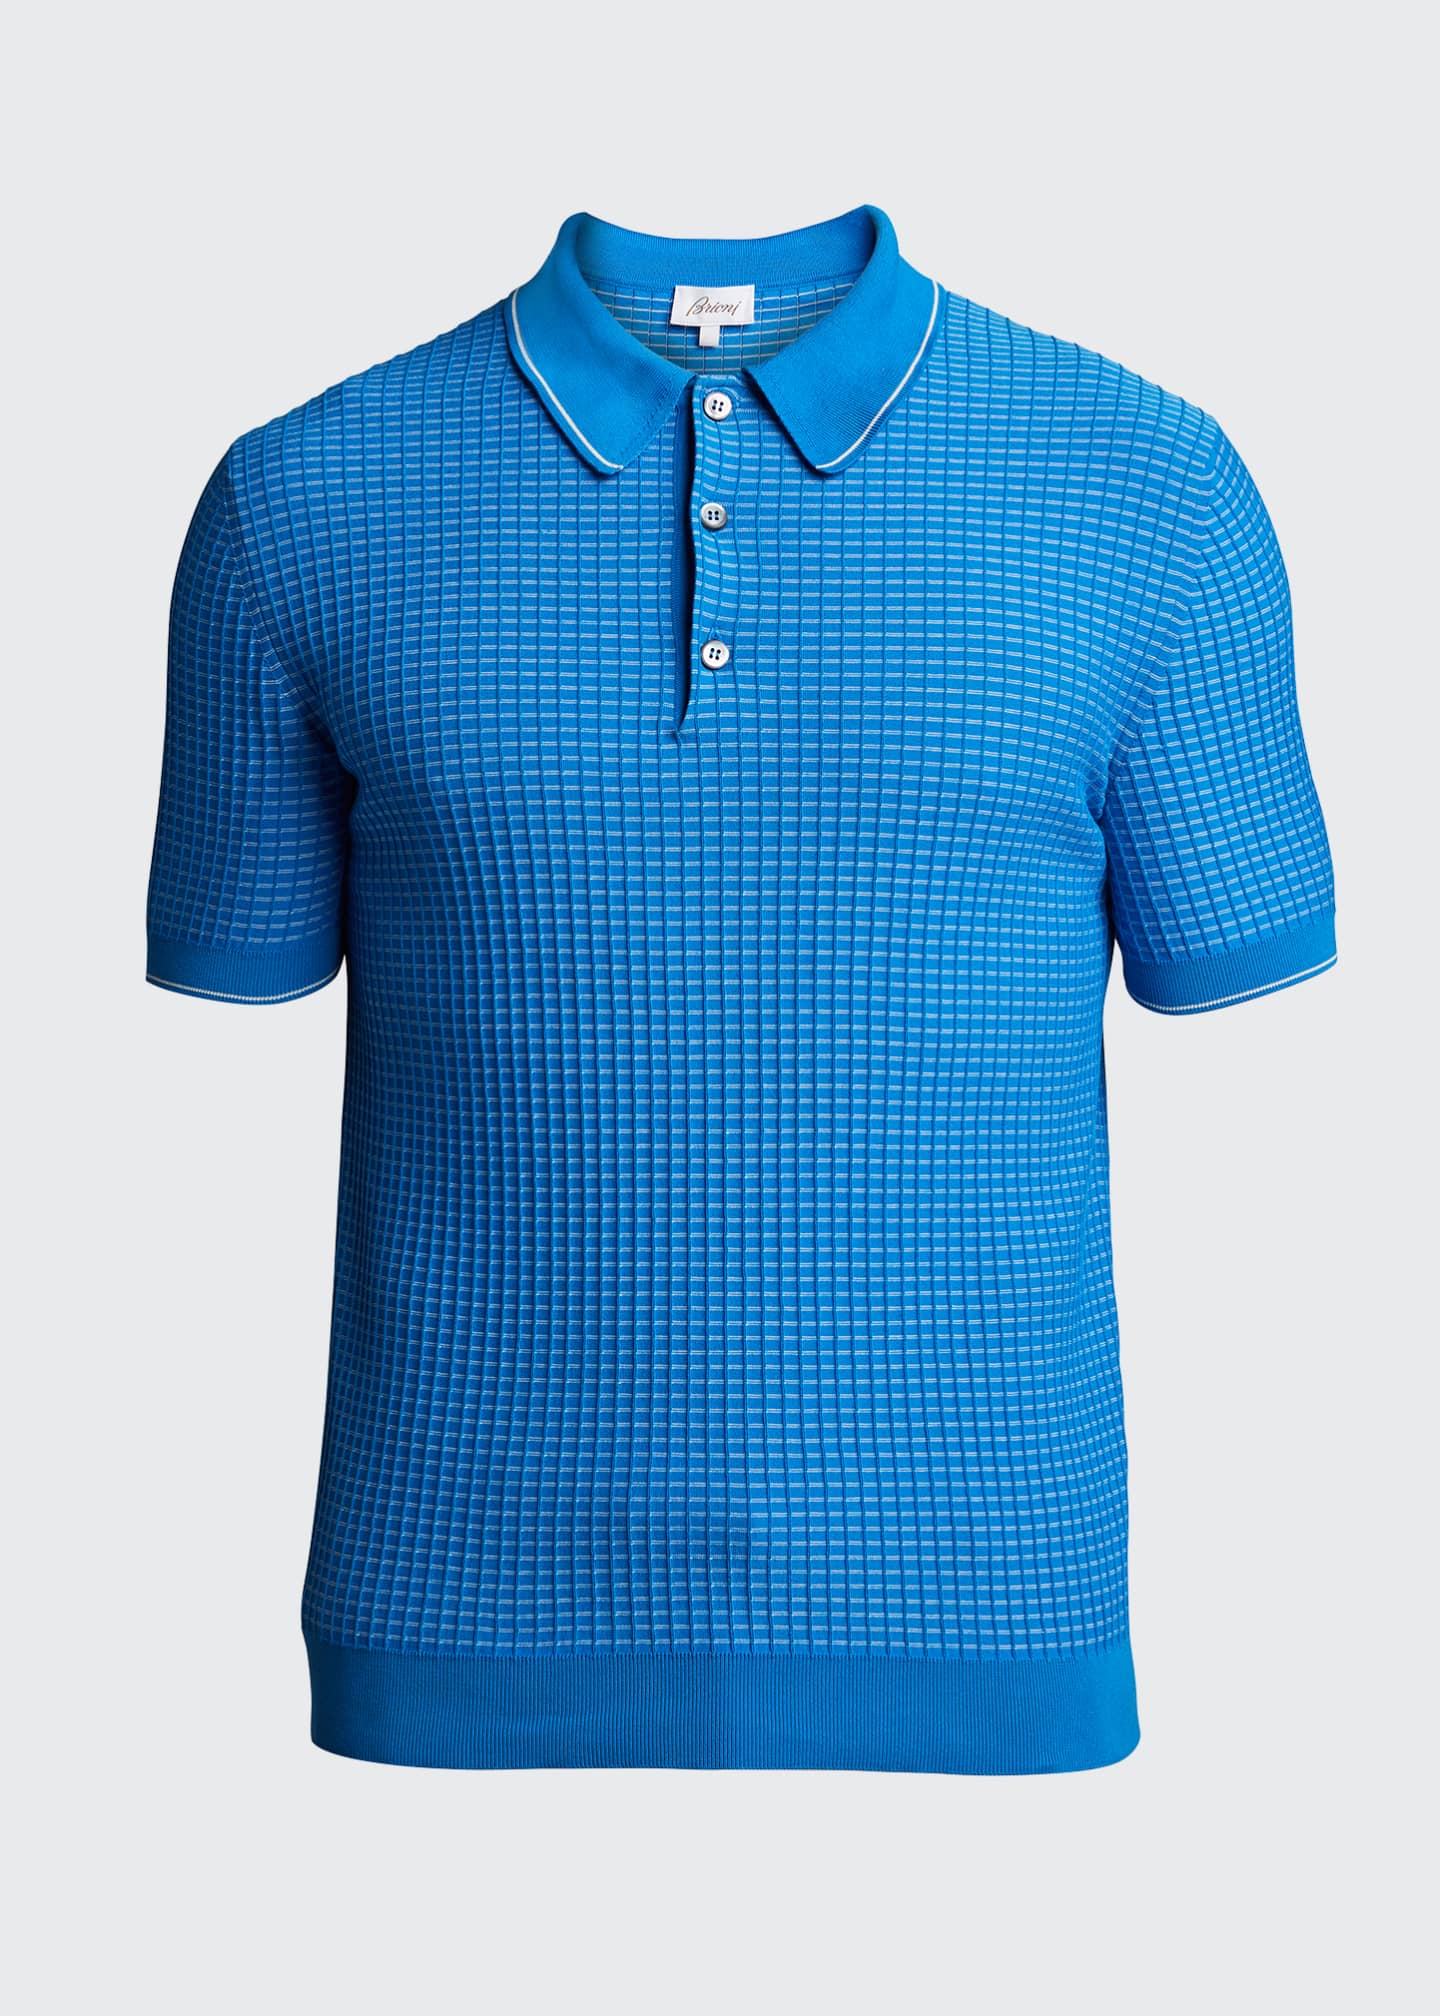 Another Brioni Men's Waffle-Knit Polo Shirt